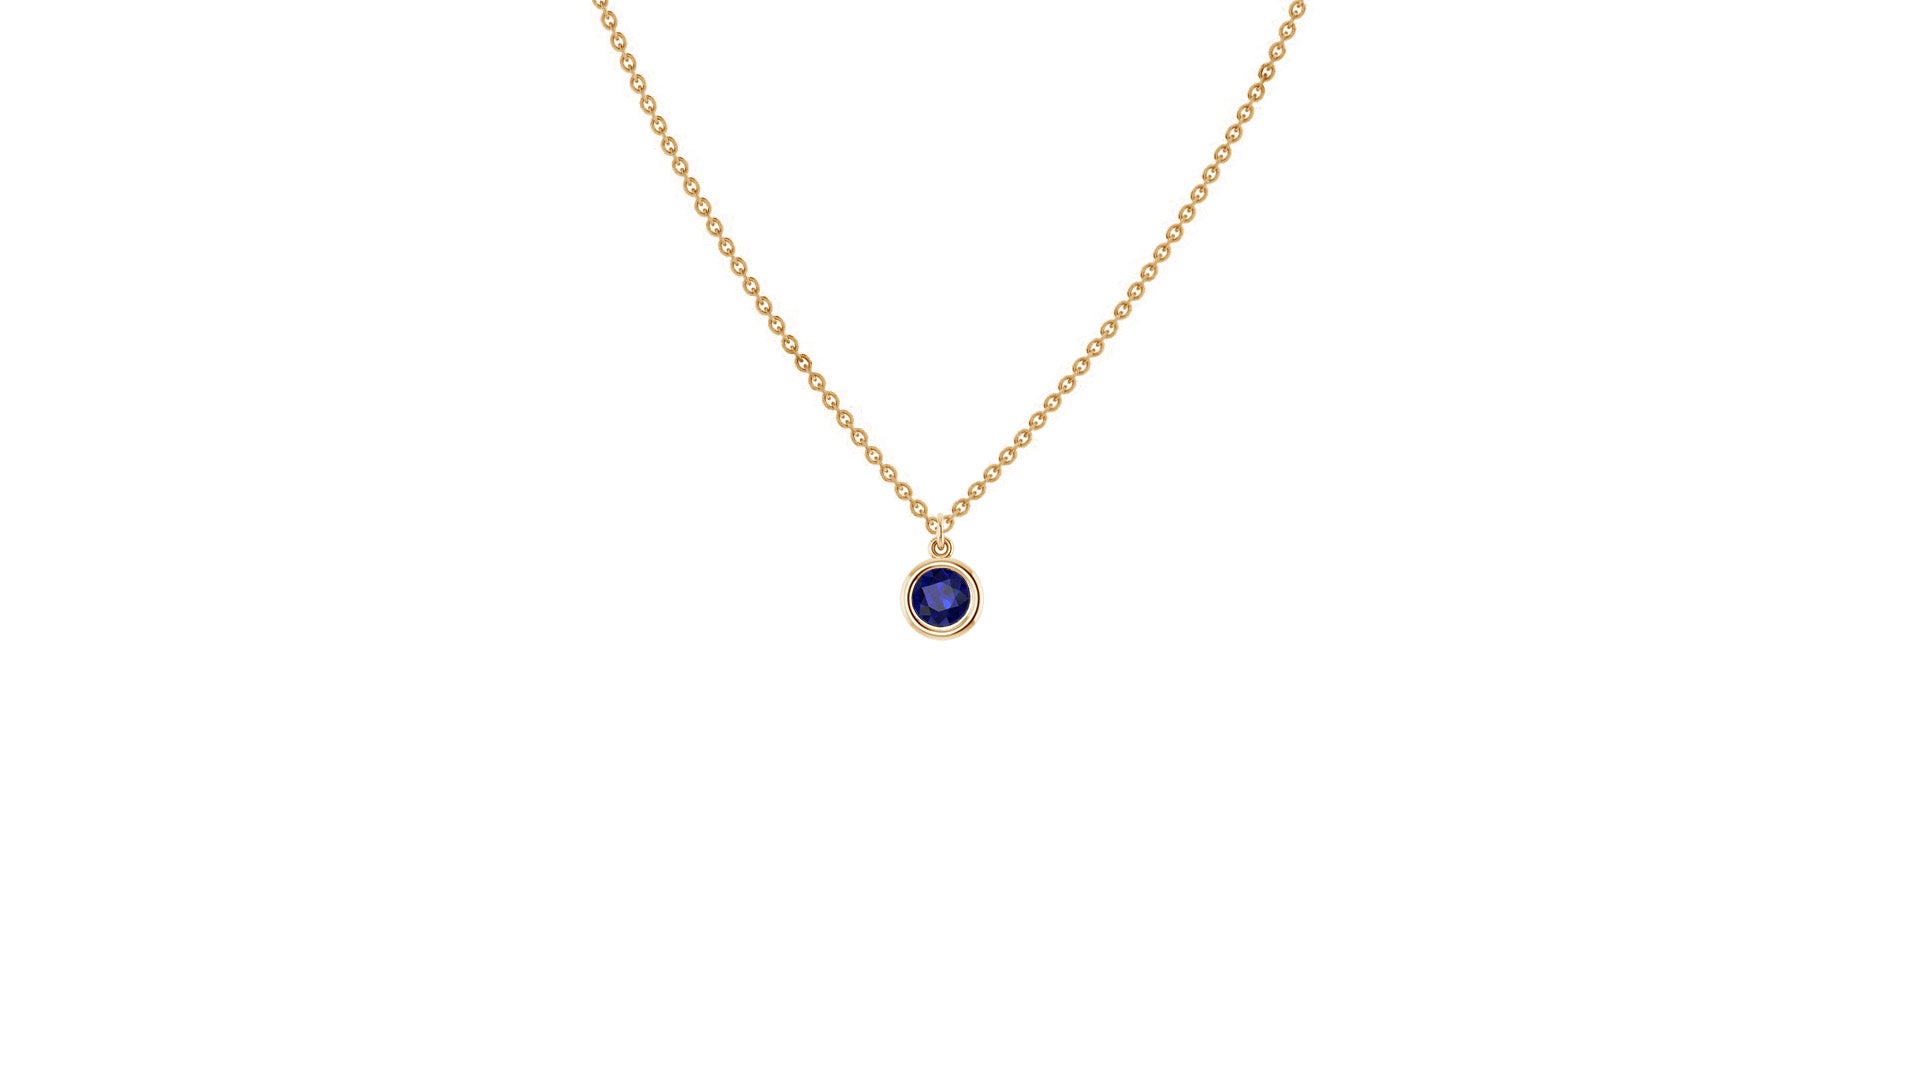 September Blue Sapphire Birthstone Necklace in 14kt Yellow Gold